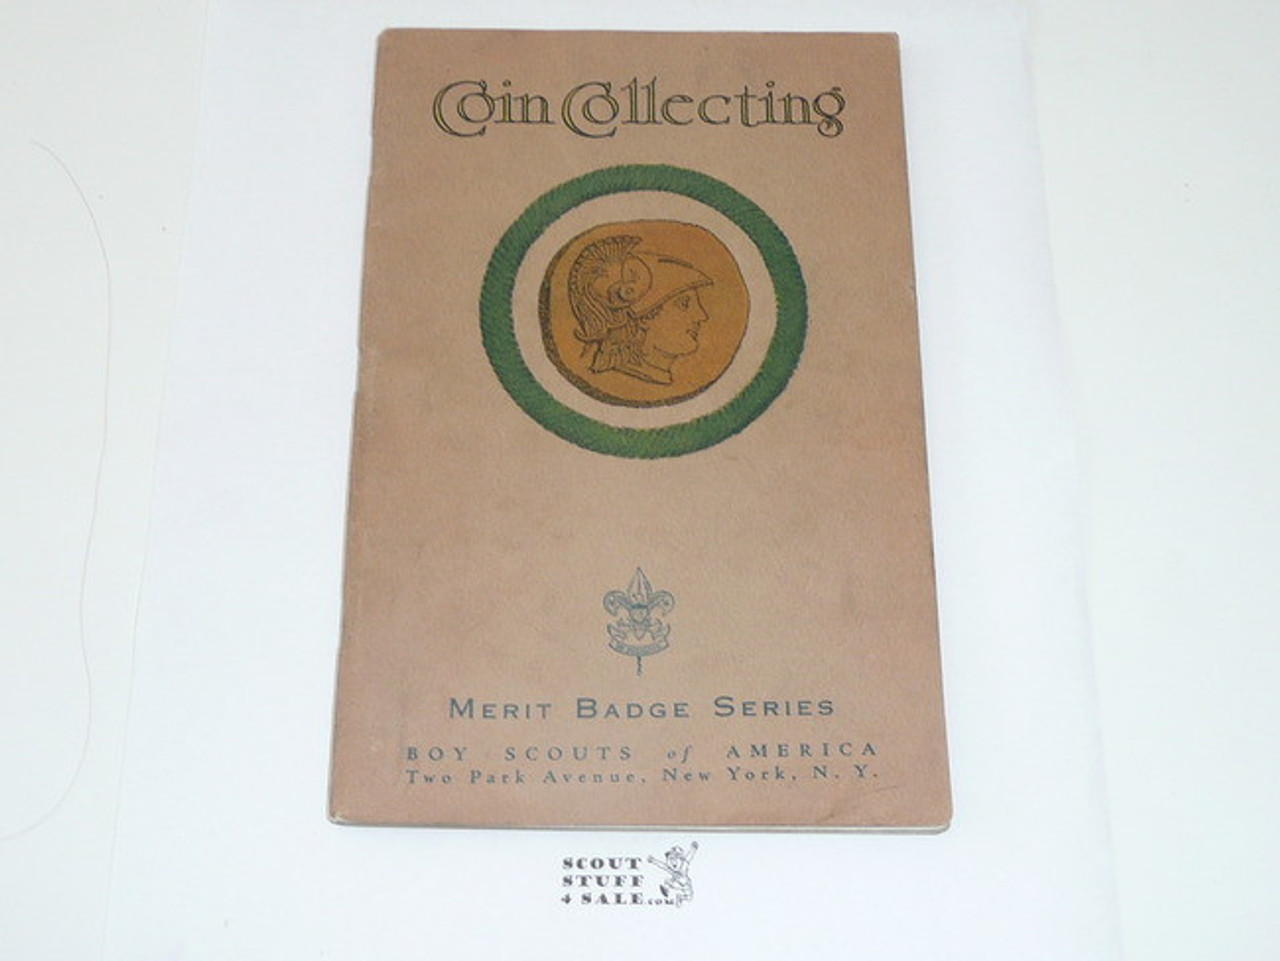 Coin Collecting Merit Badge Pamphlet, Type 3, Tan Cover, 10-38 Printing